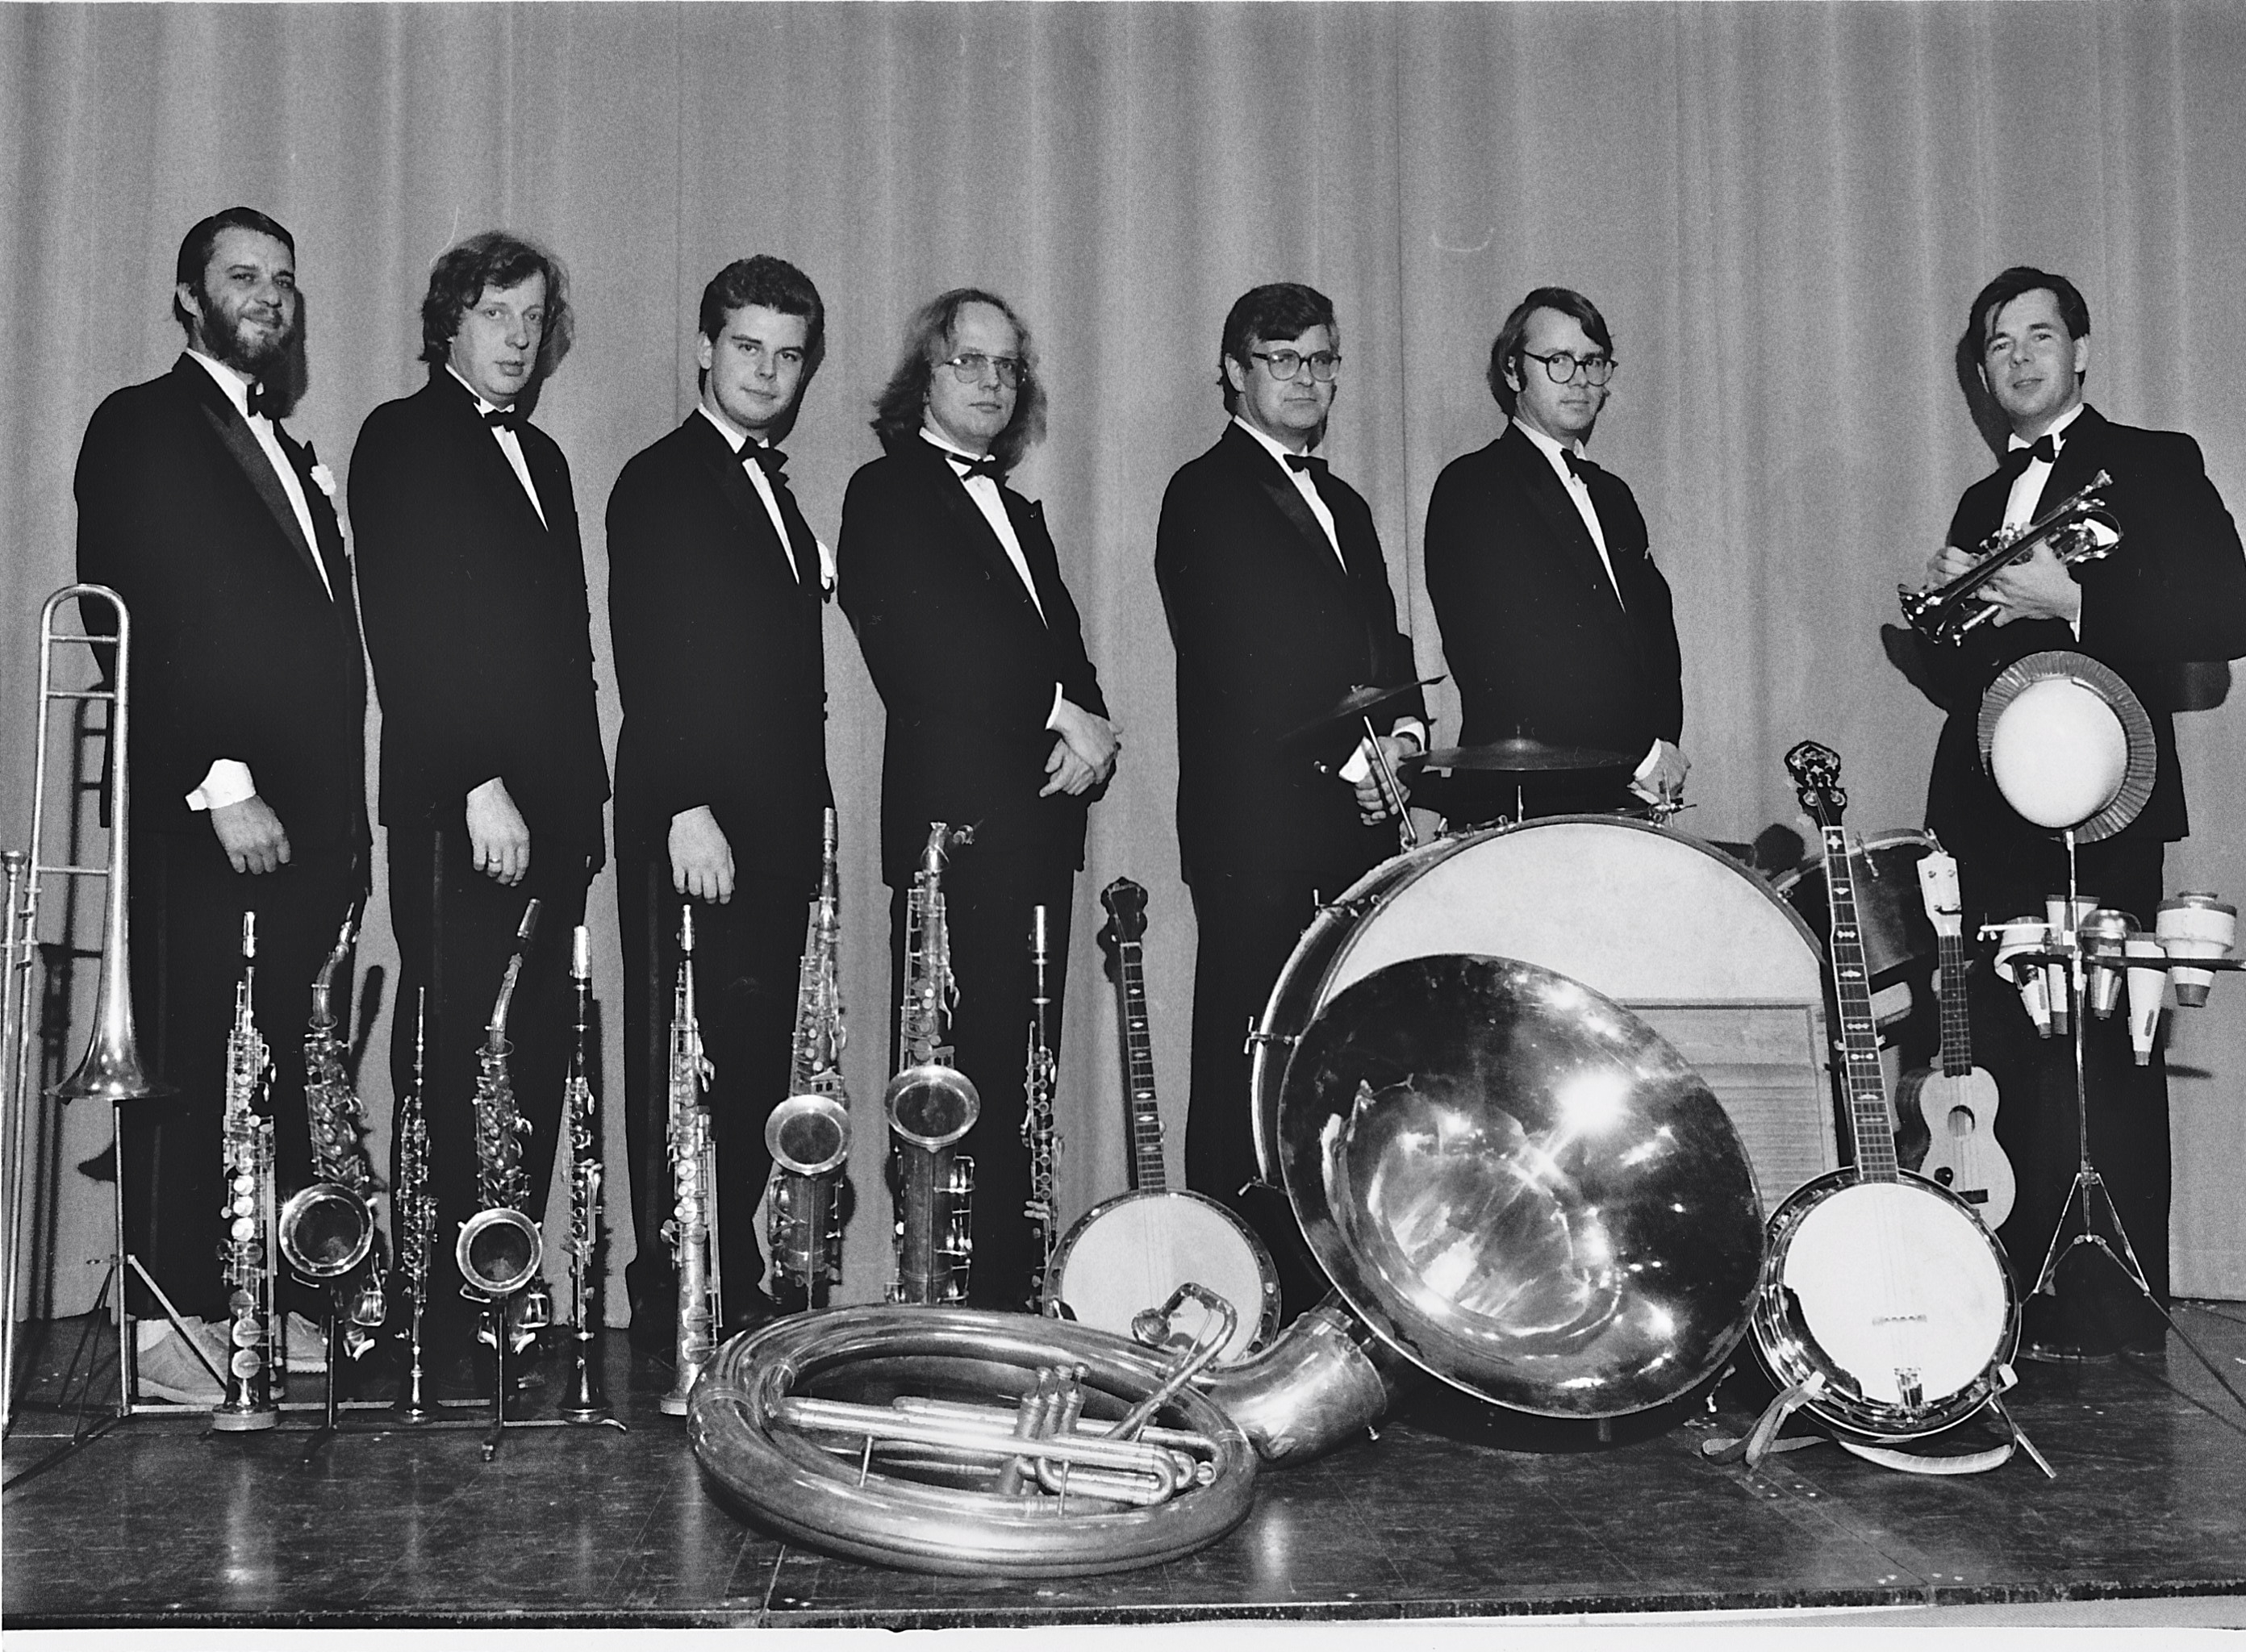 The Absalon Orchestra 1985